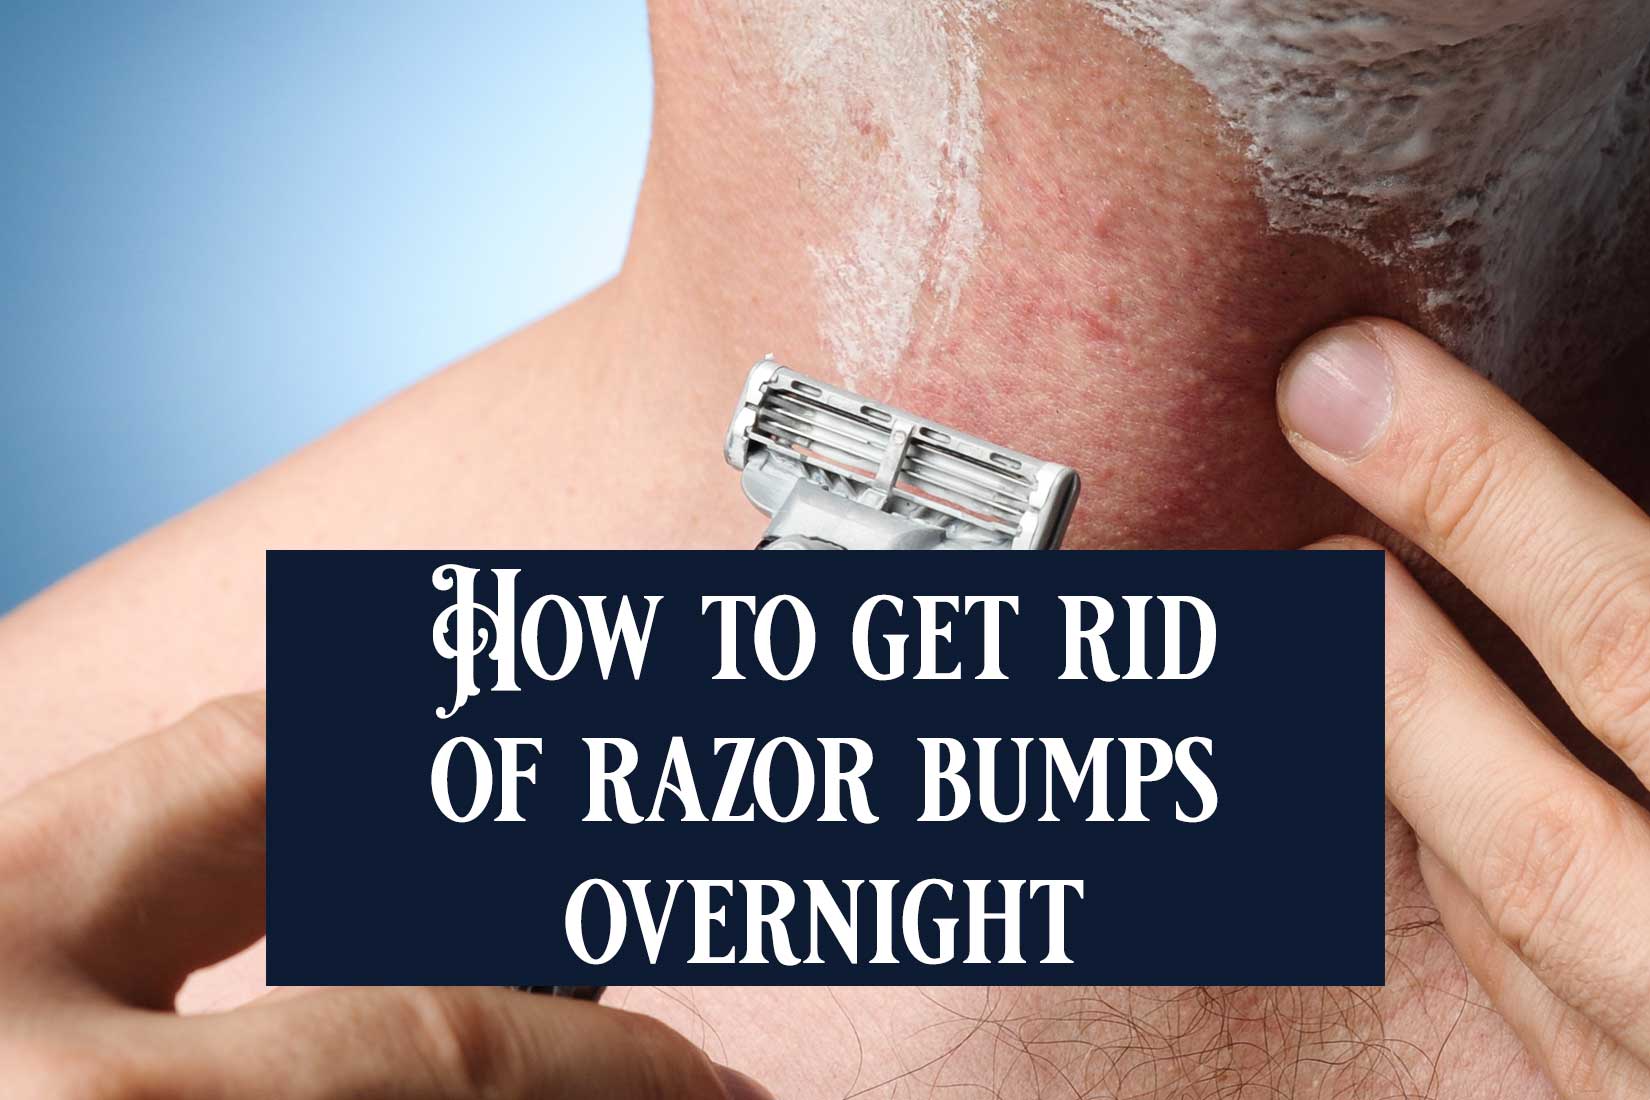 How-to-get-rid-of-razor-bumps-overnight